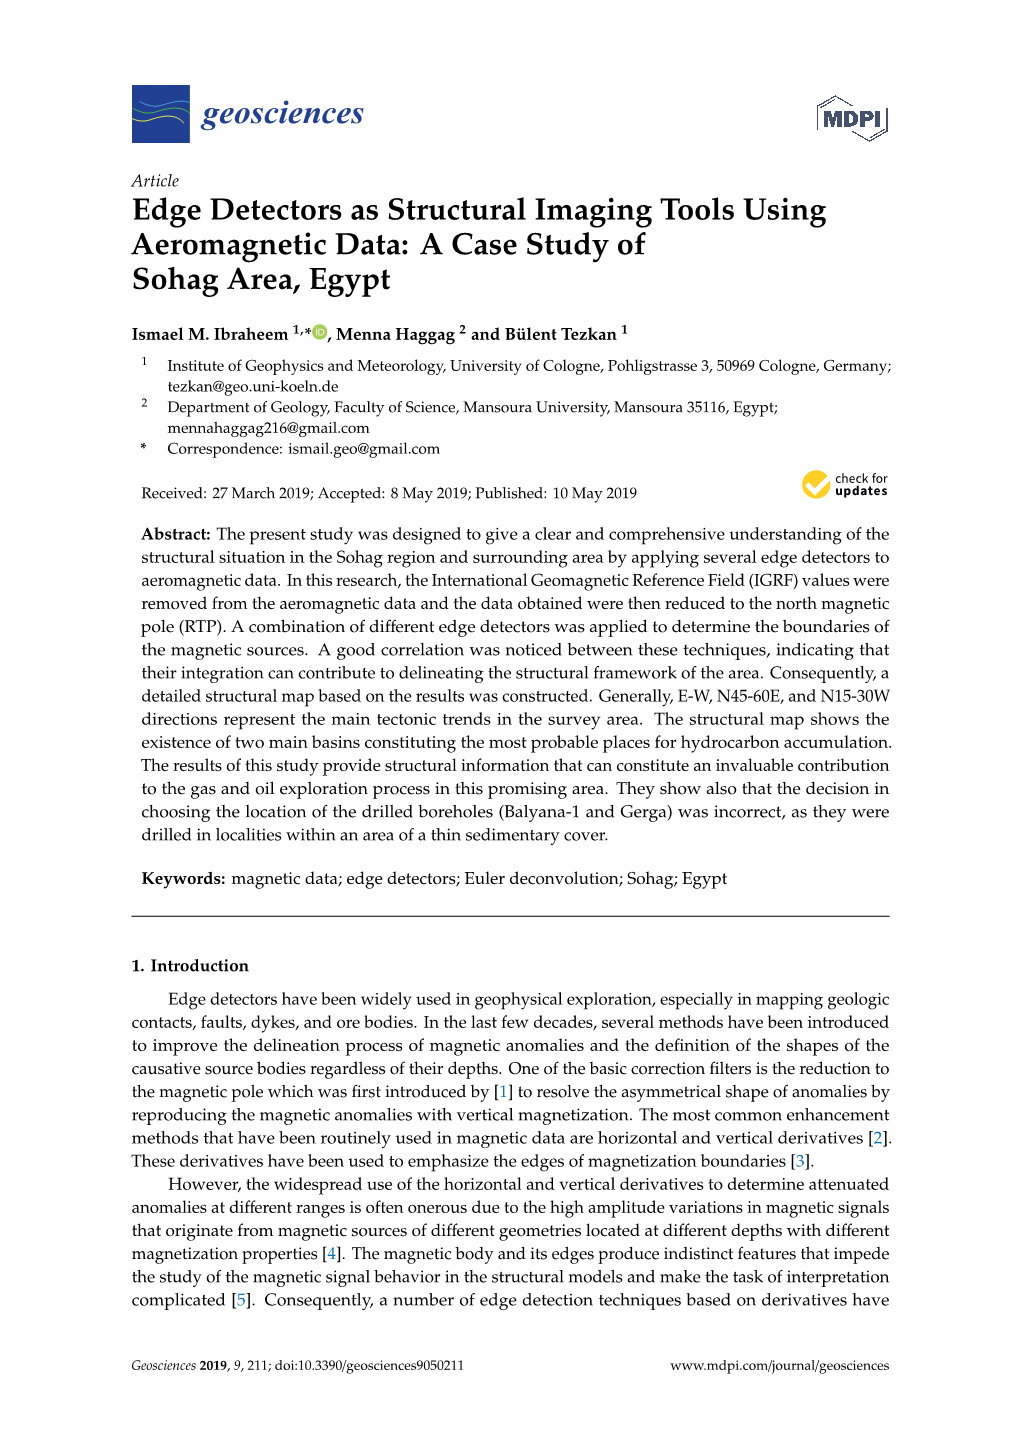 Edge Detectors As Structural Imaging Tools Using Aeromagnetic Data: a Case Study of Sohag Area, Egypt